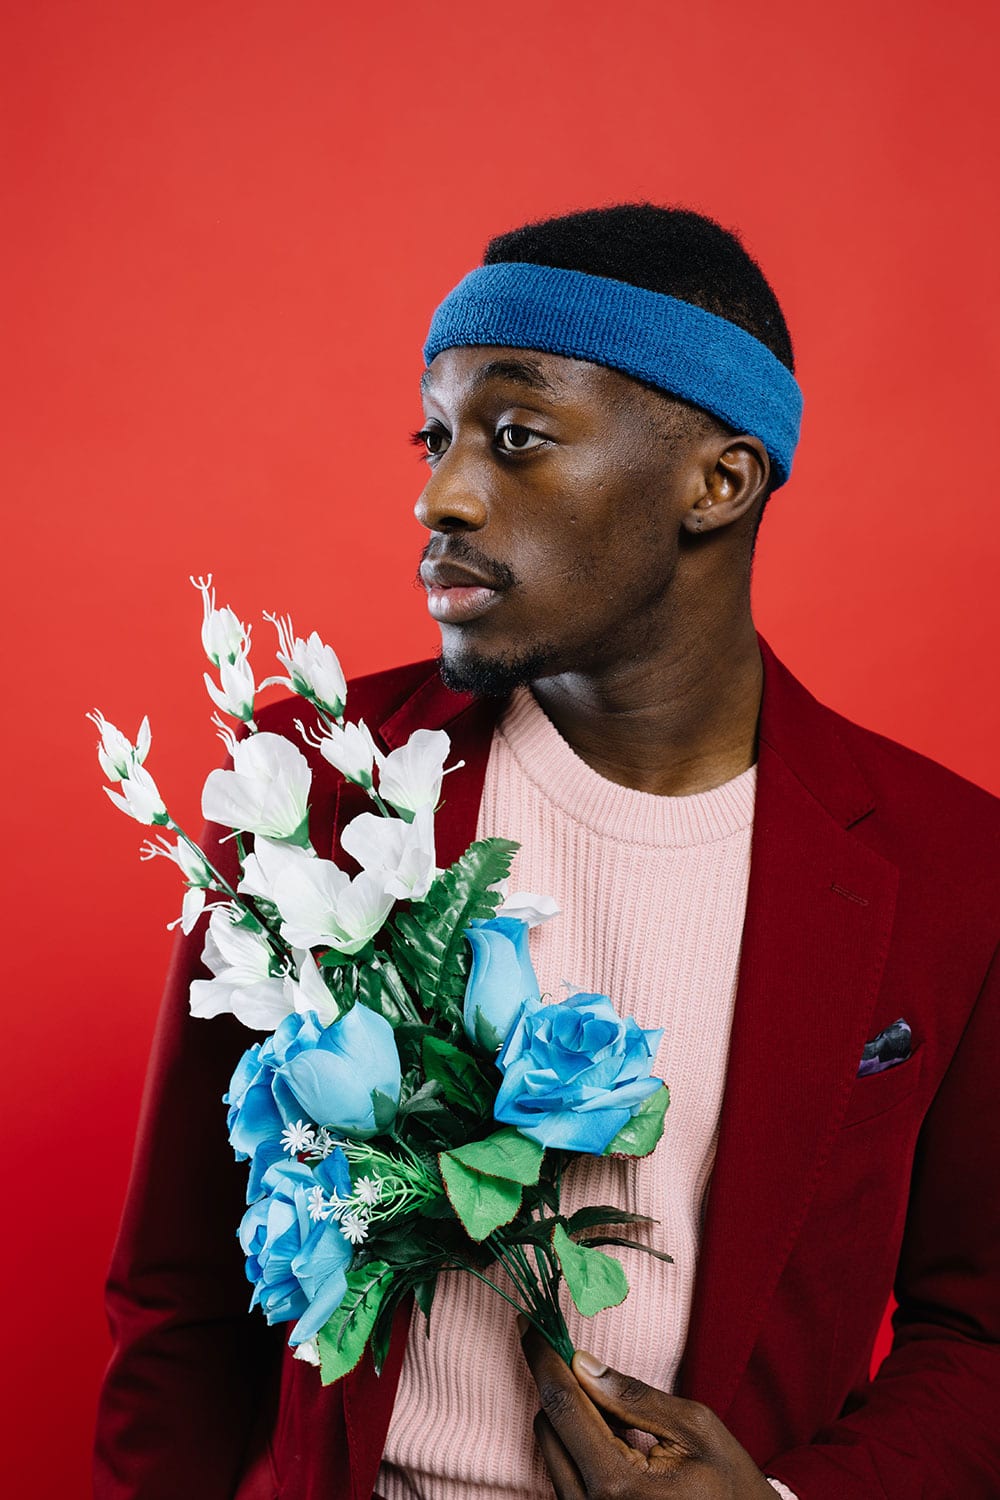 Black Man In Suit Holding Flowers